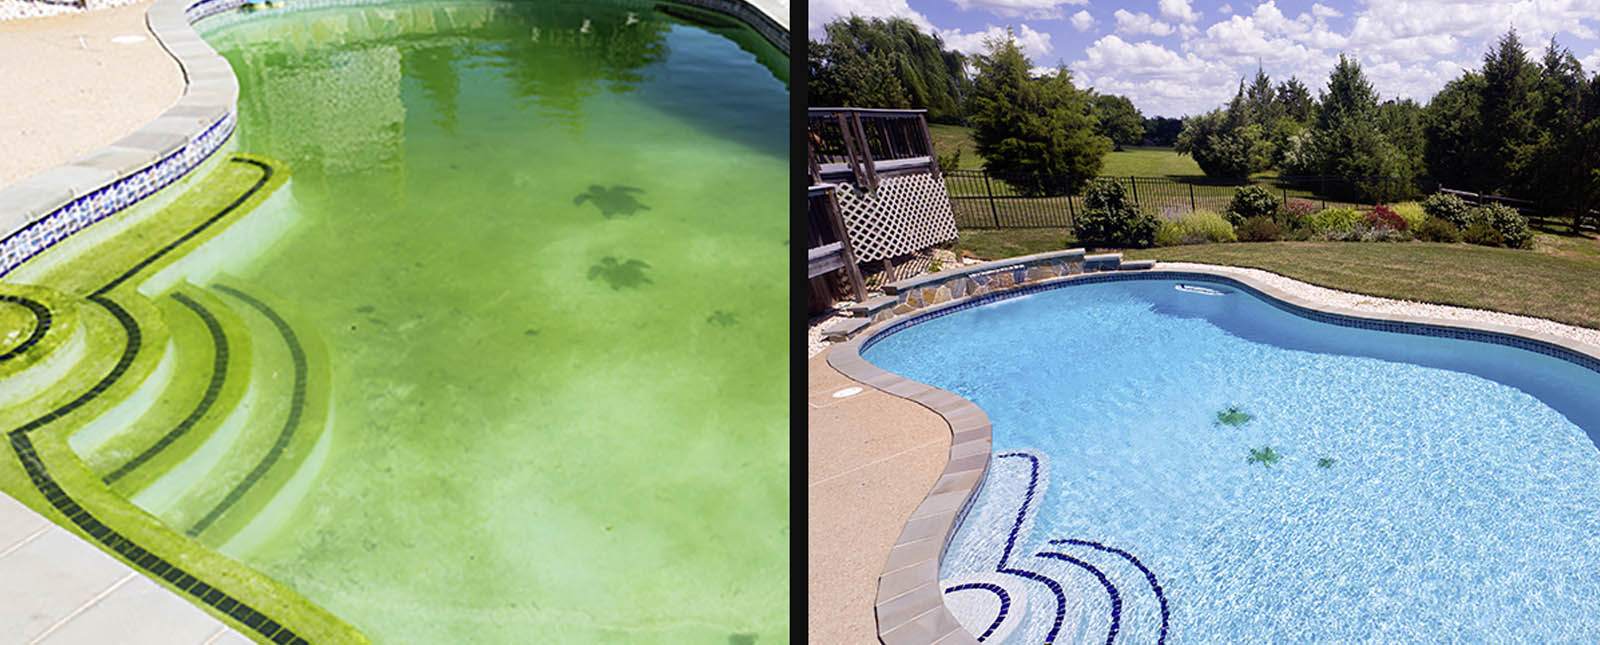 Re-opening your pool in the spring: how should you deal with green water?